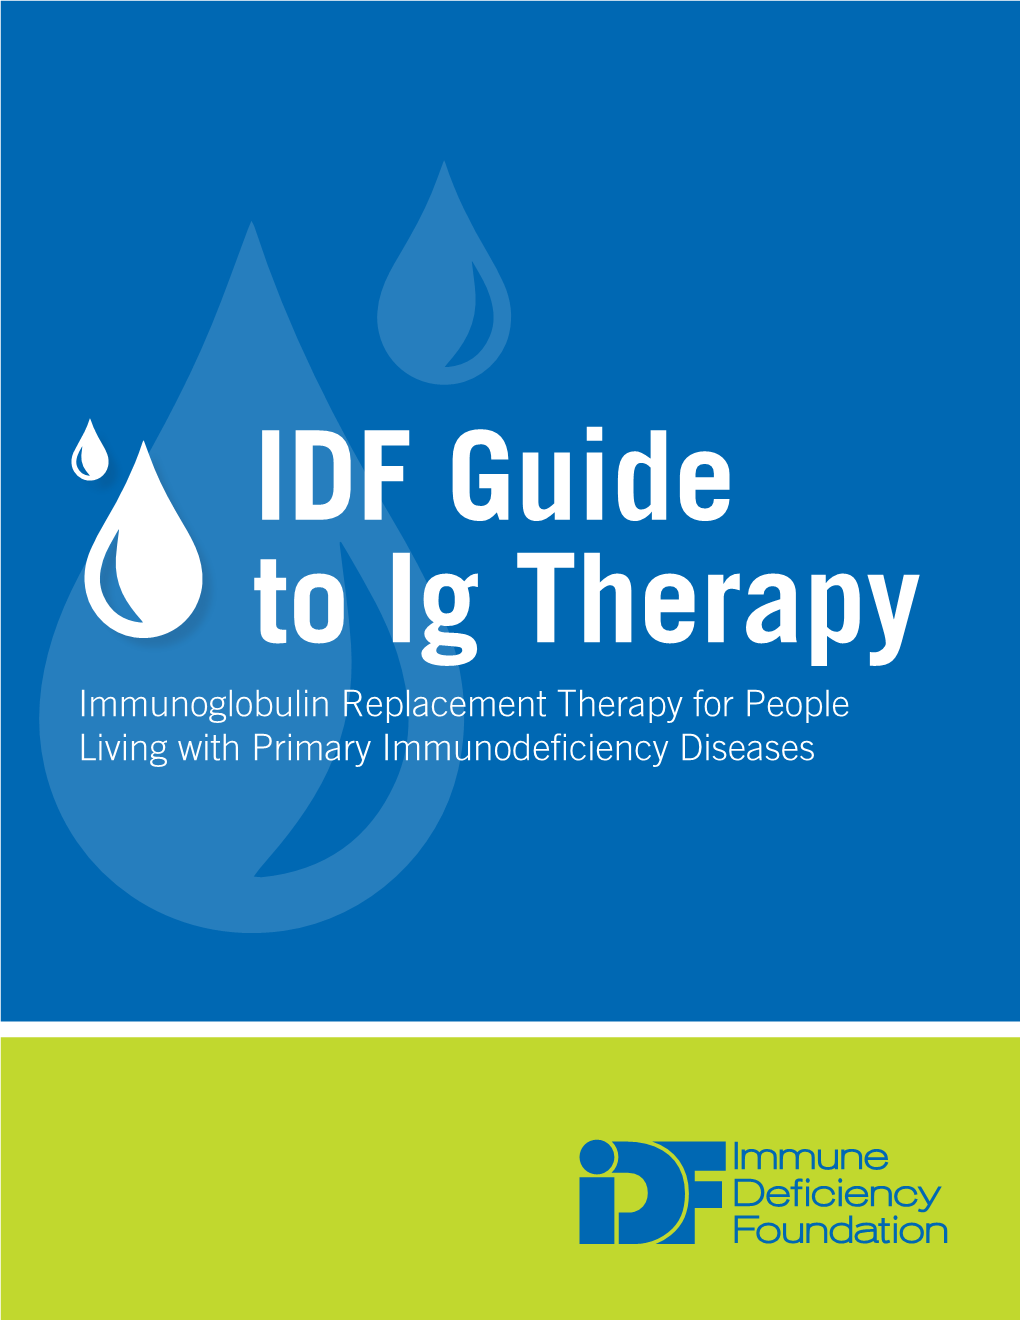 IDF Guide to Ig Therapy